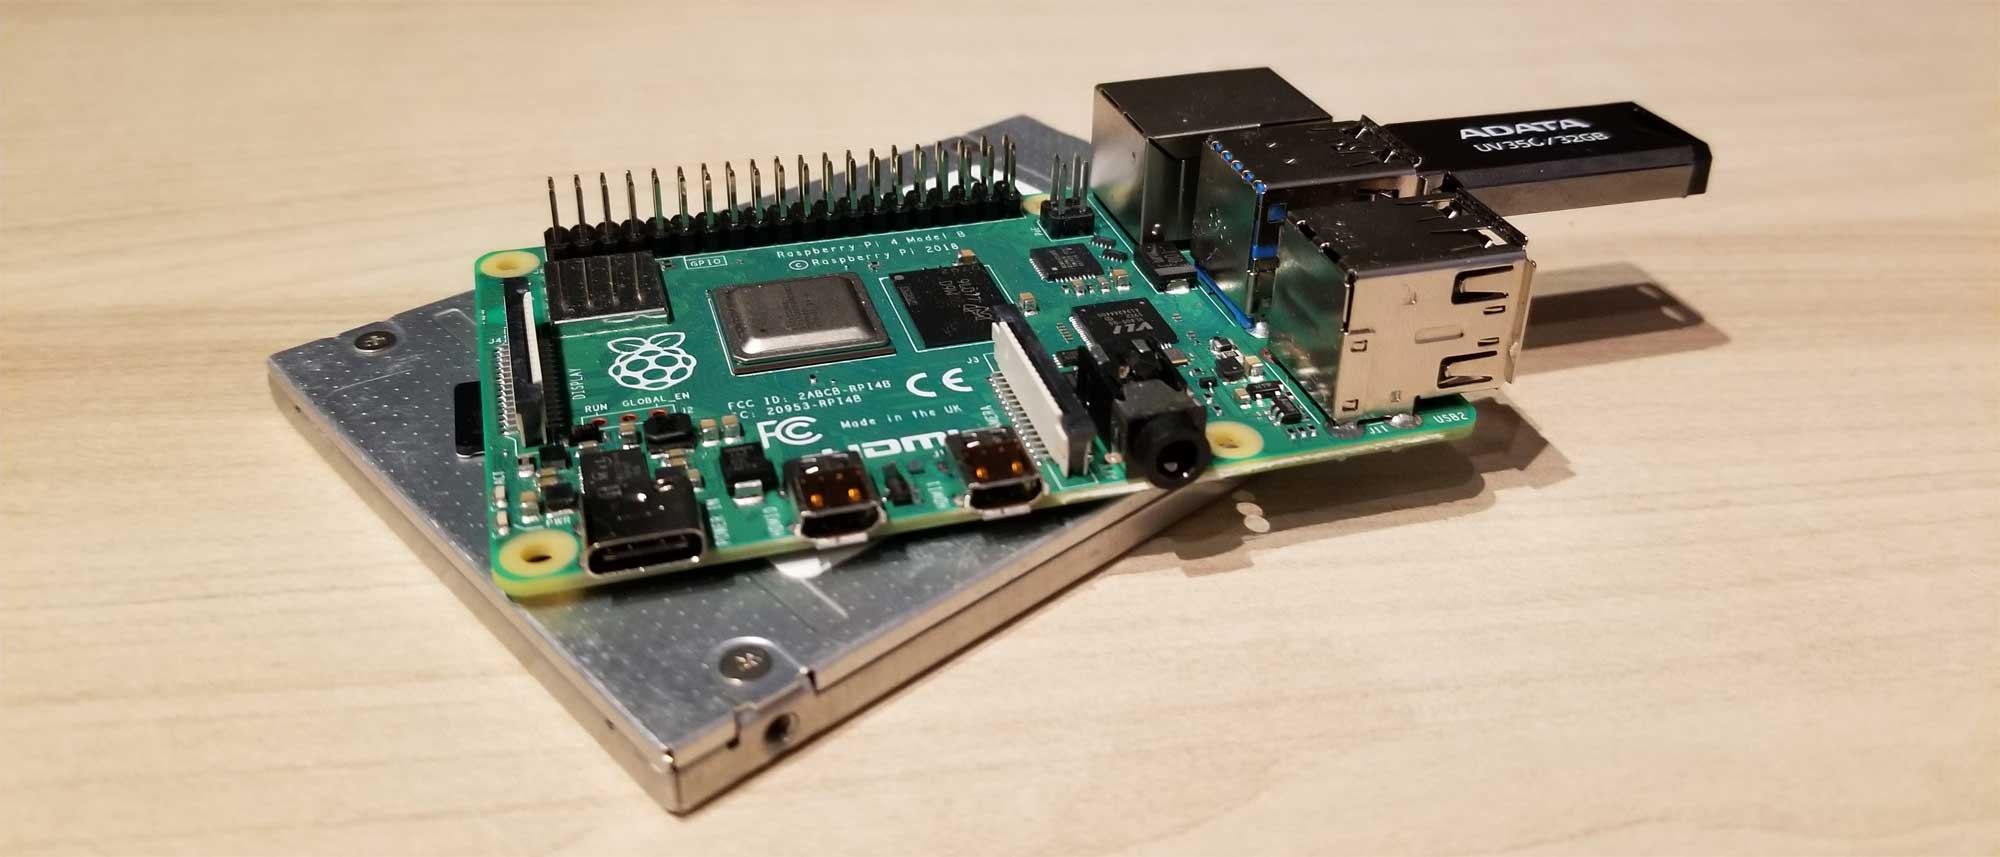 Fateful loose the temper Conversational How to Boot Raspberry Pi 4 / 400 From an SSD or Flash Drive | Tom's Hardware